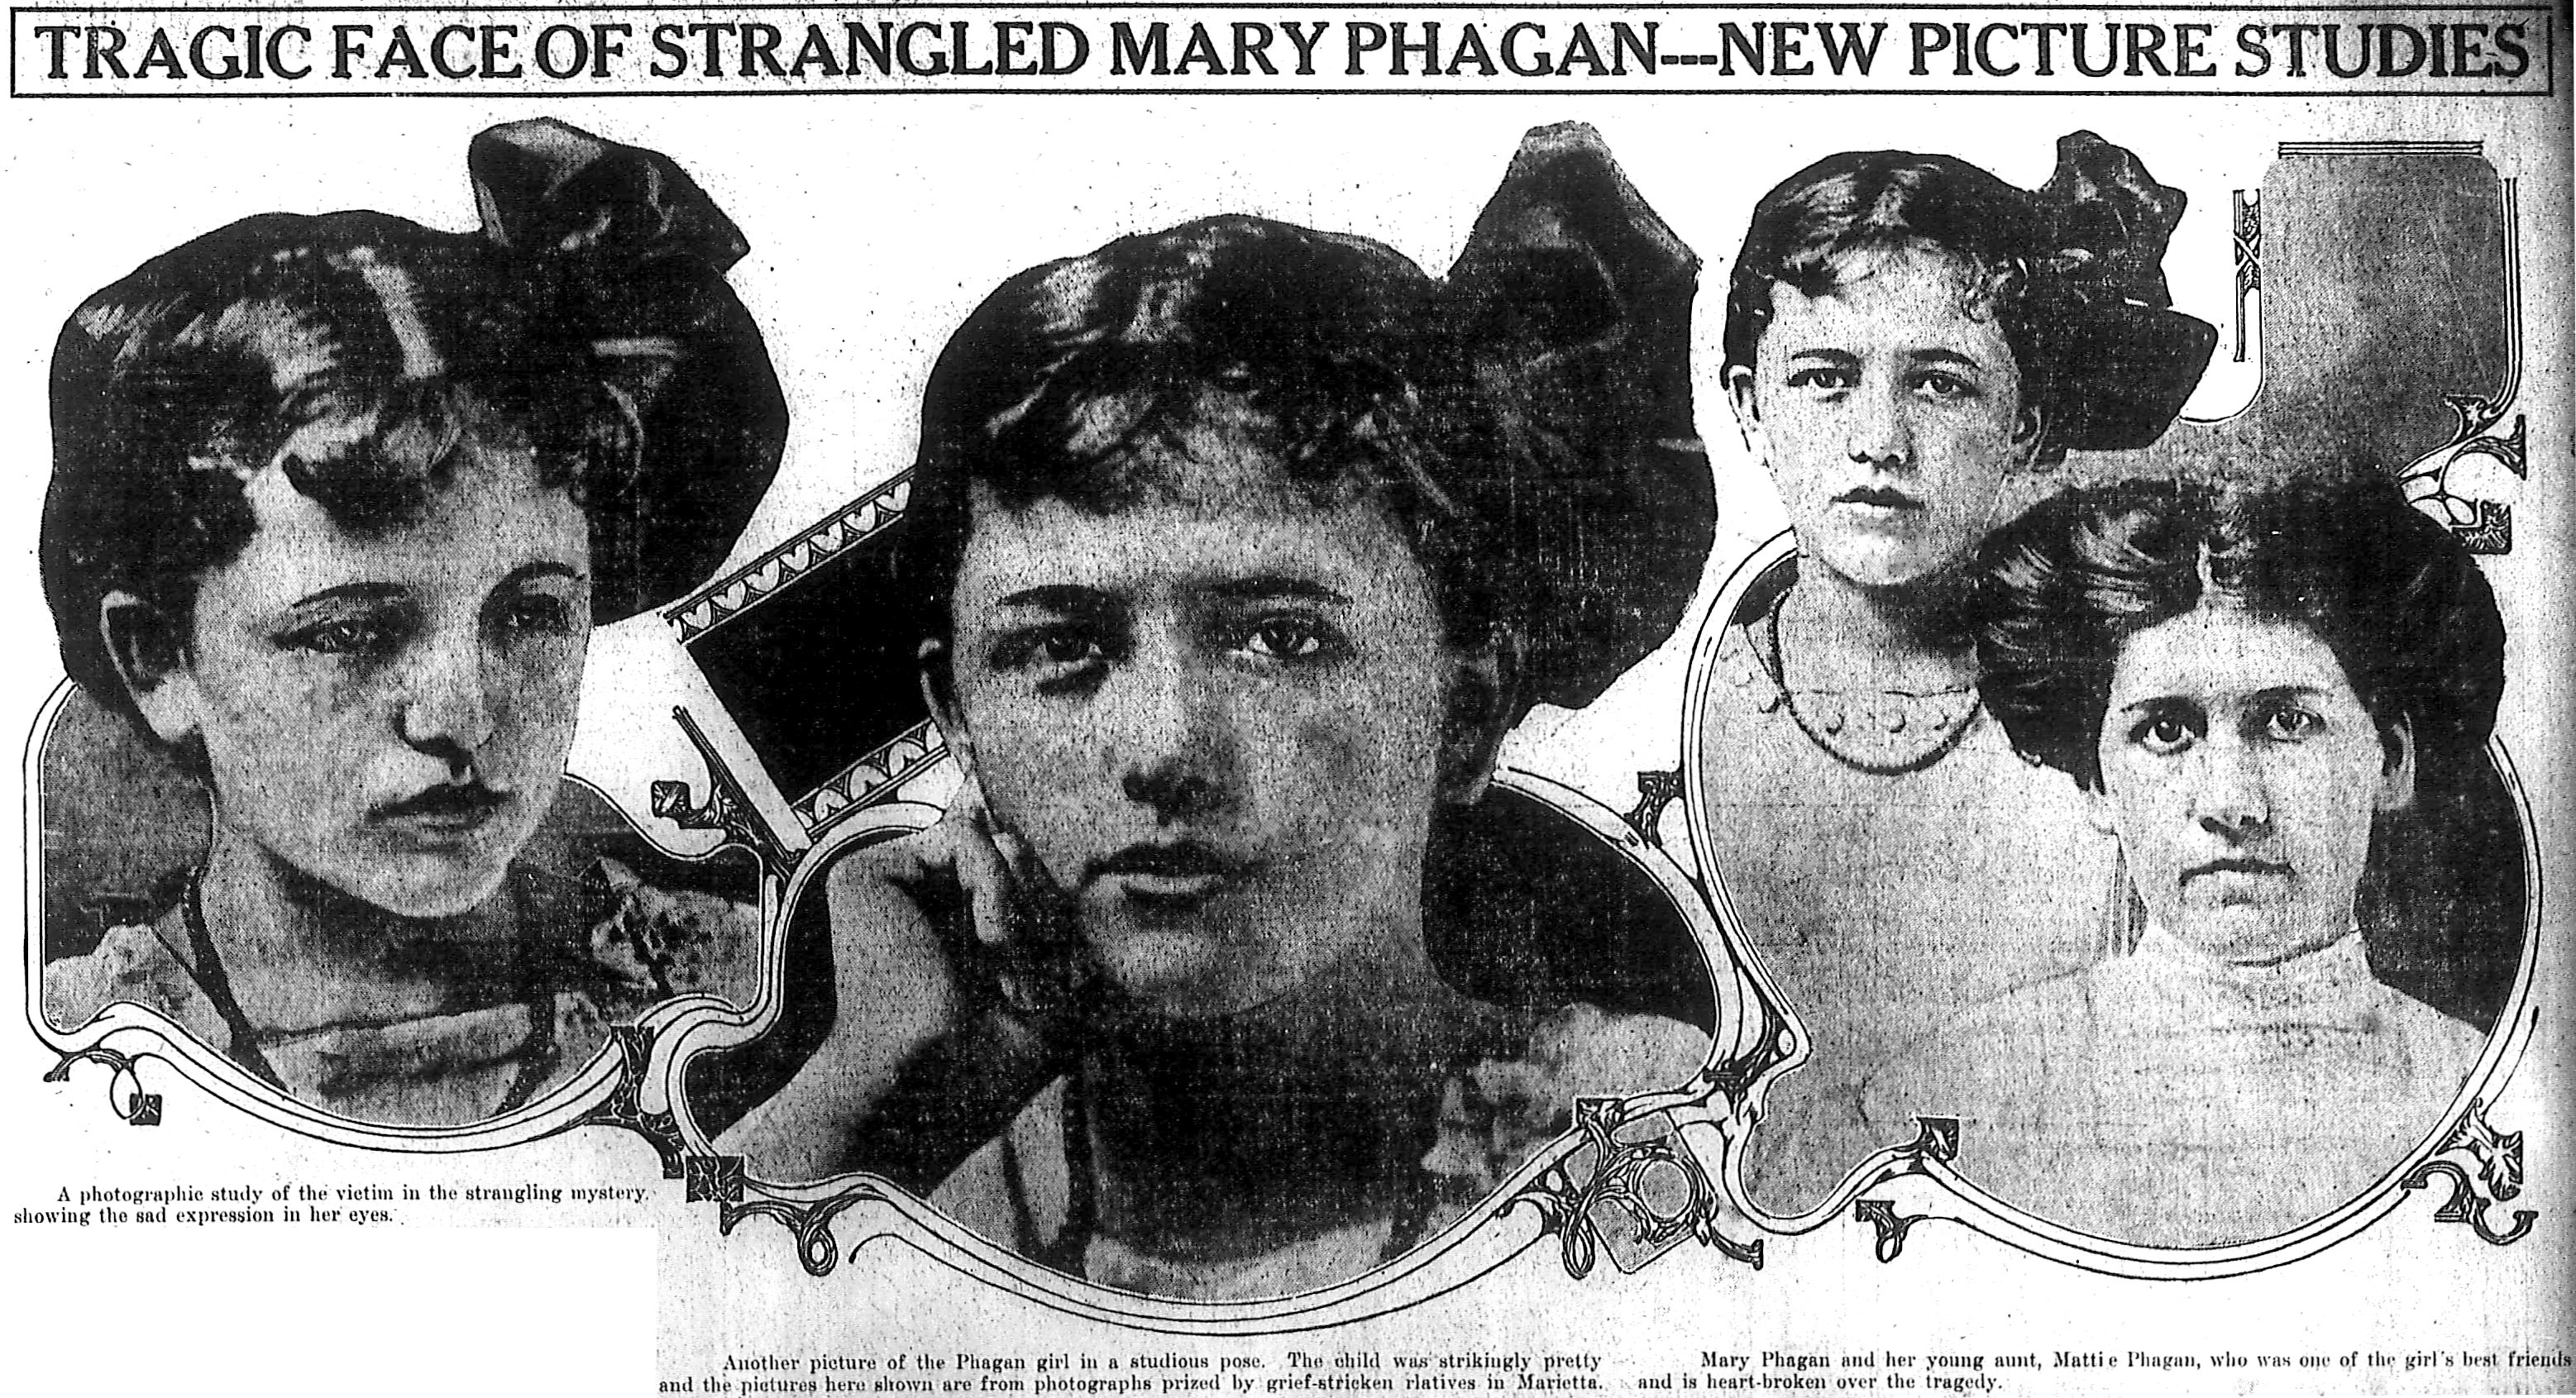 Justice for Mary Phagan sur Twitter : "Today in the Leo ...